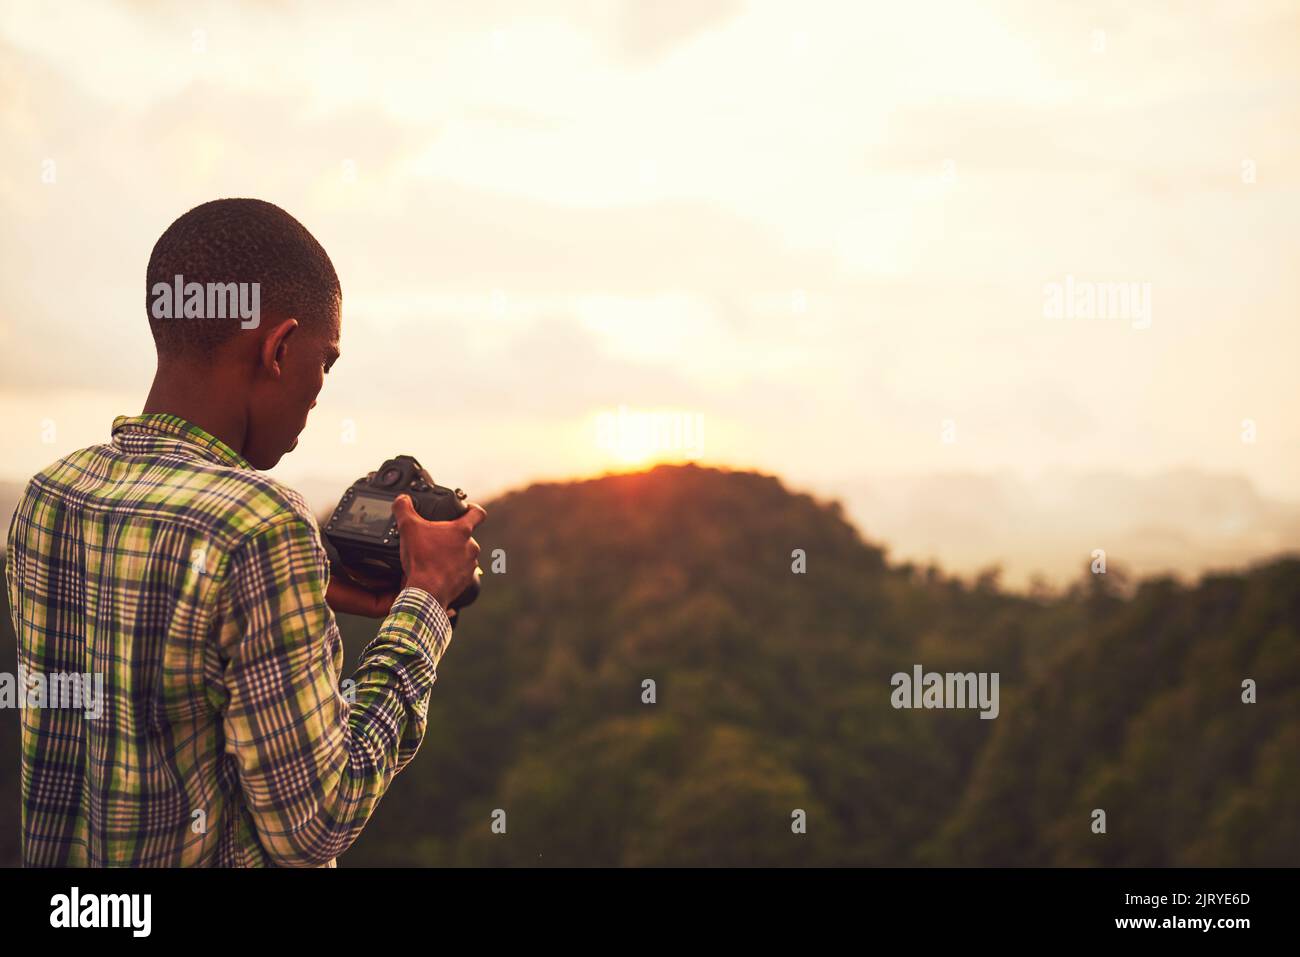 Snapping some scenic shots. a young man taking photos of a scenic view. Stock Photo